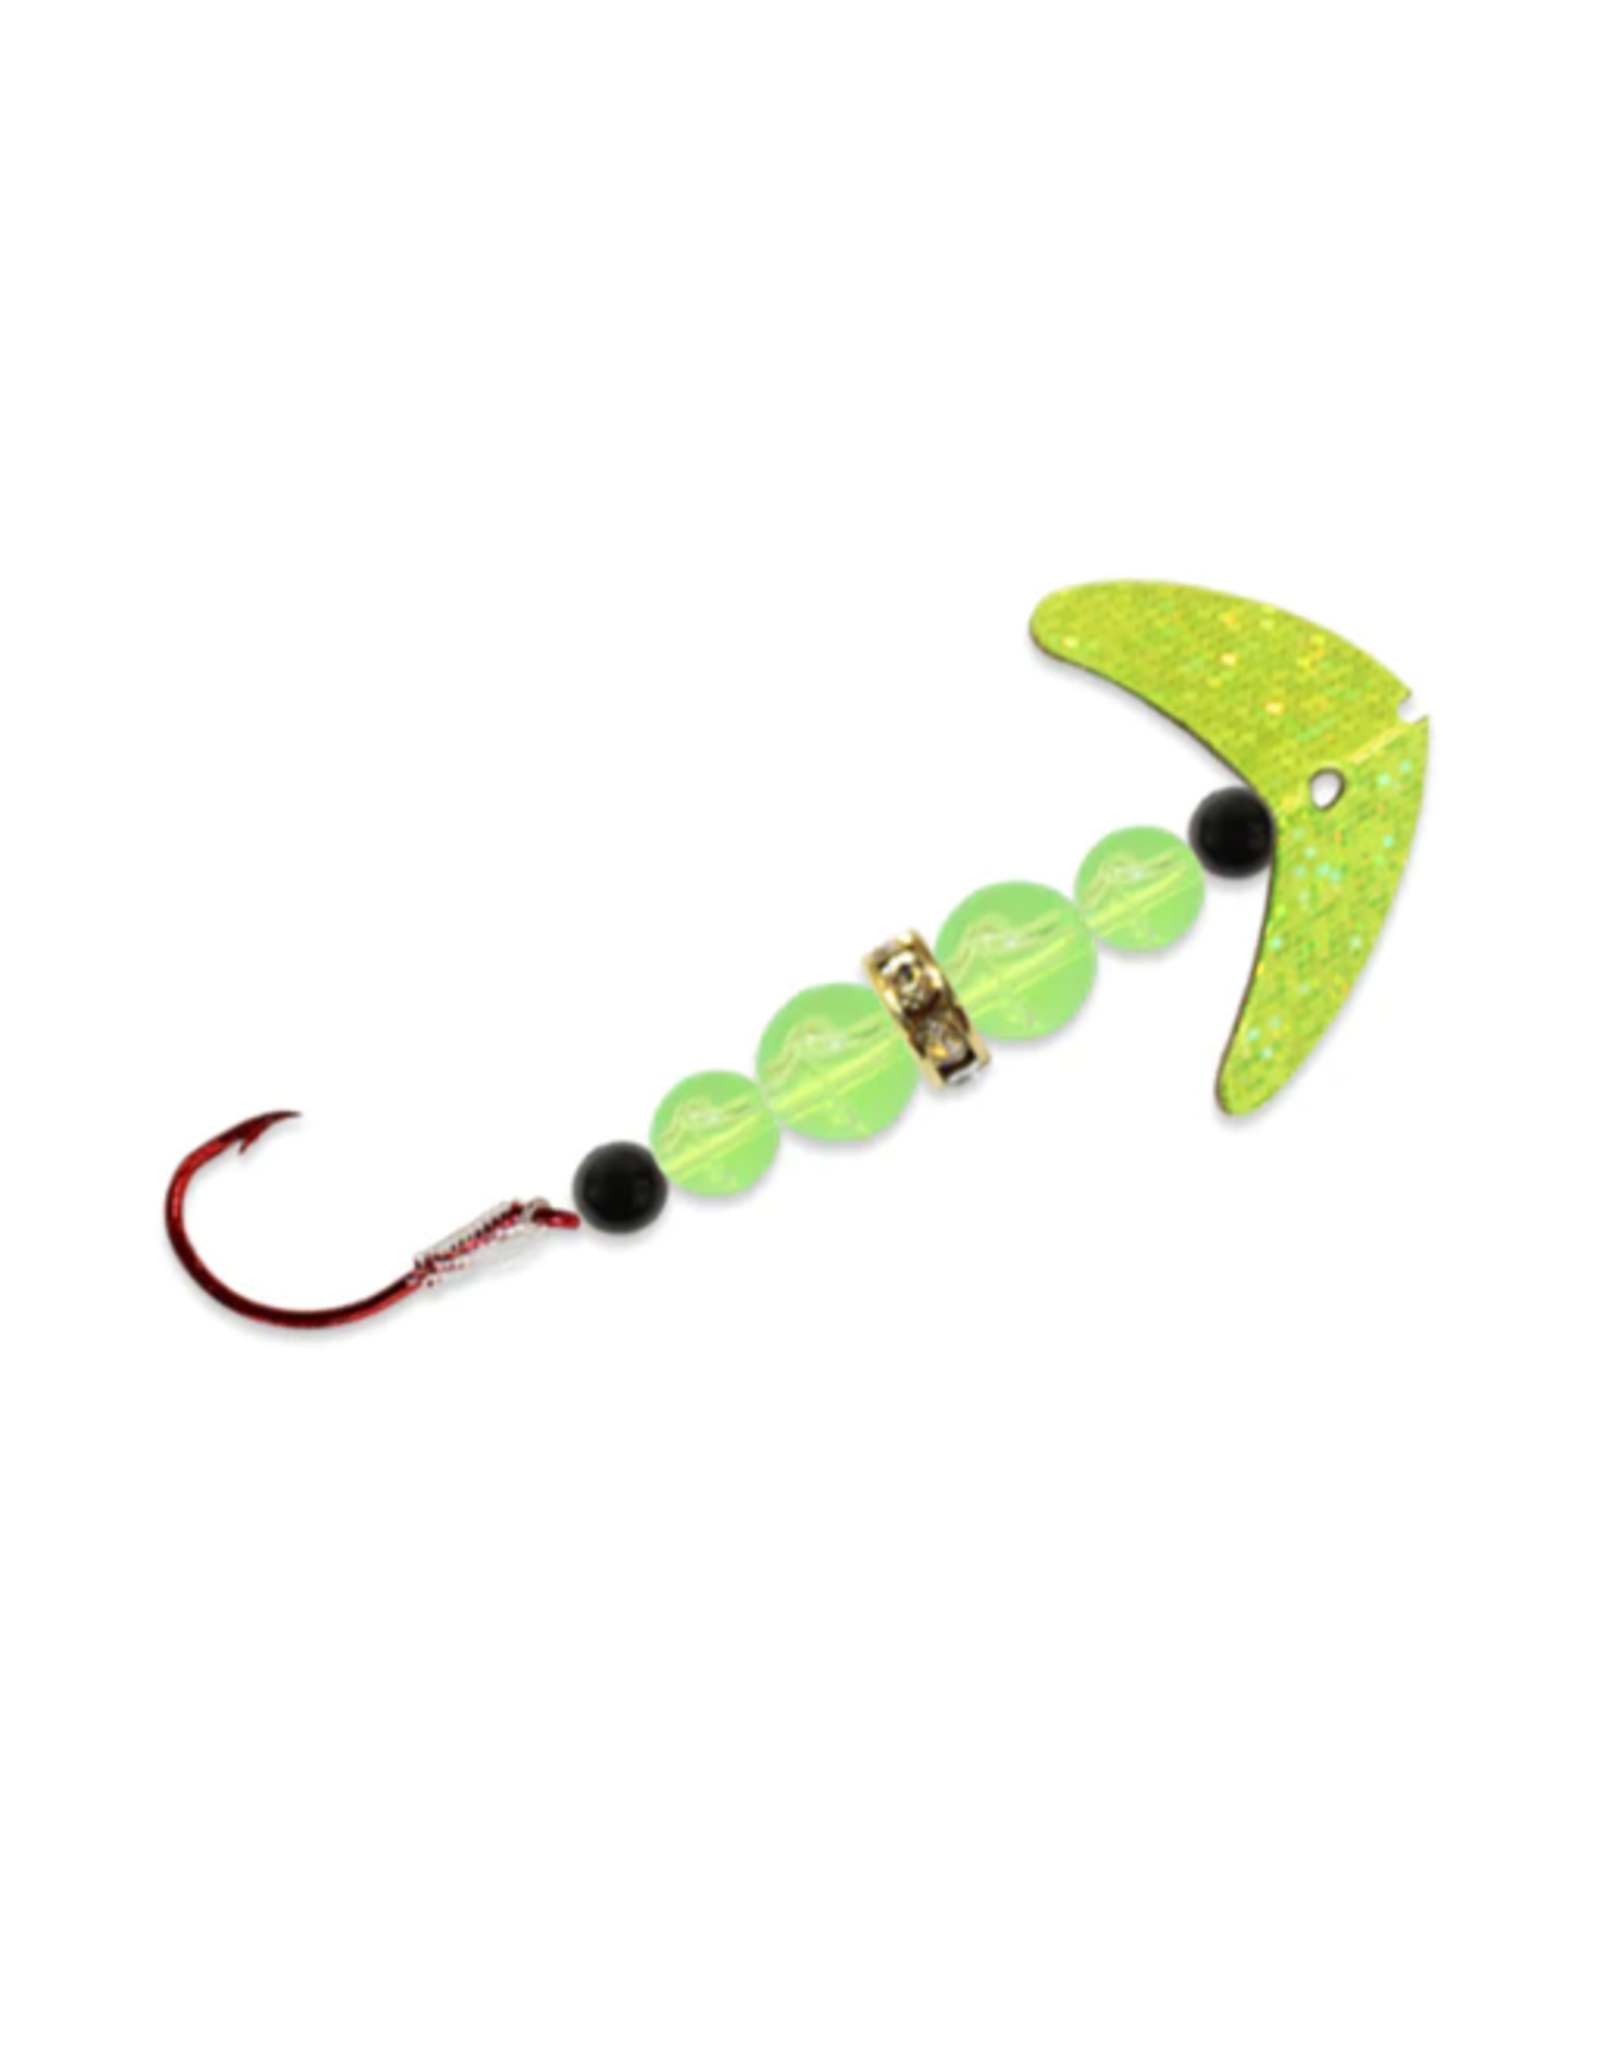 Mack's Lure Wedding Ring Mini Pro - # 6 - Chartreuse Sparkle w/ Chartreuse